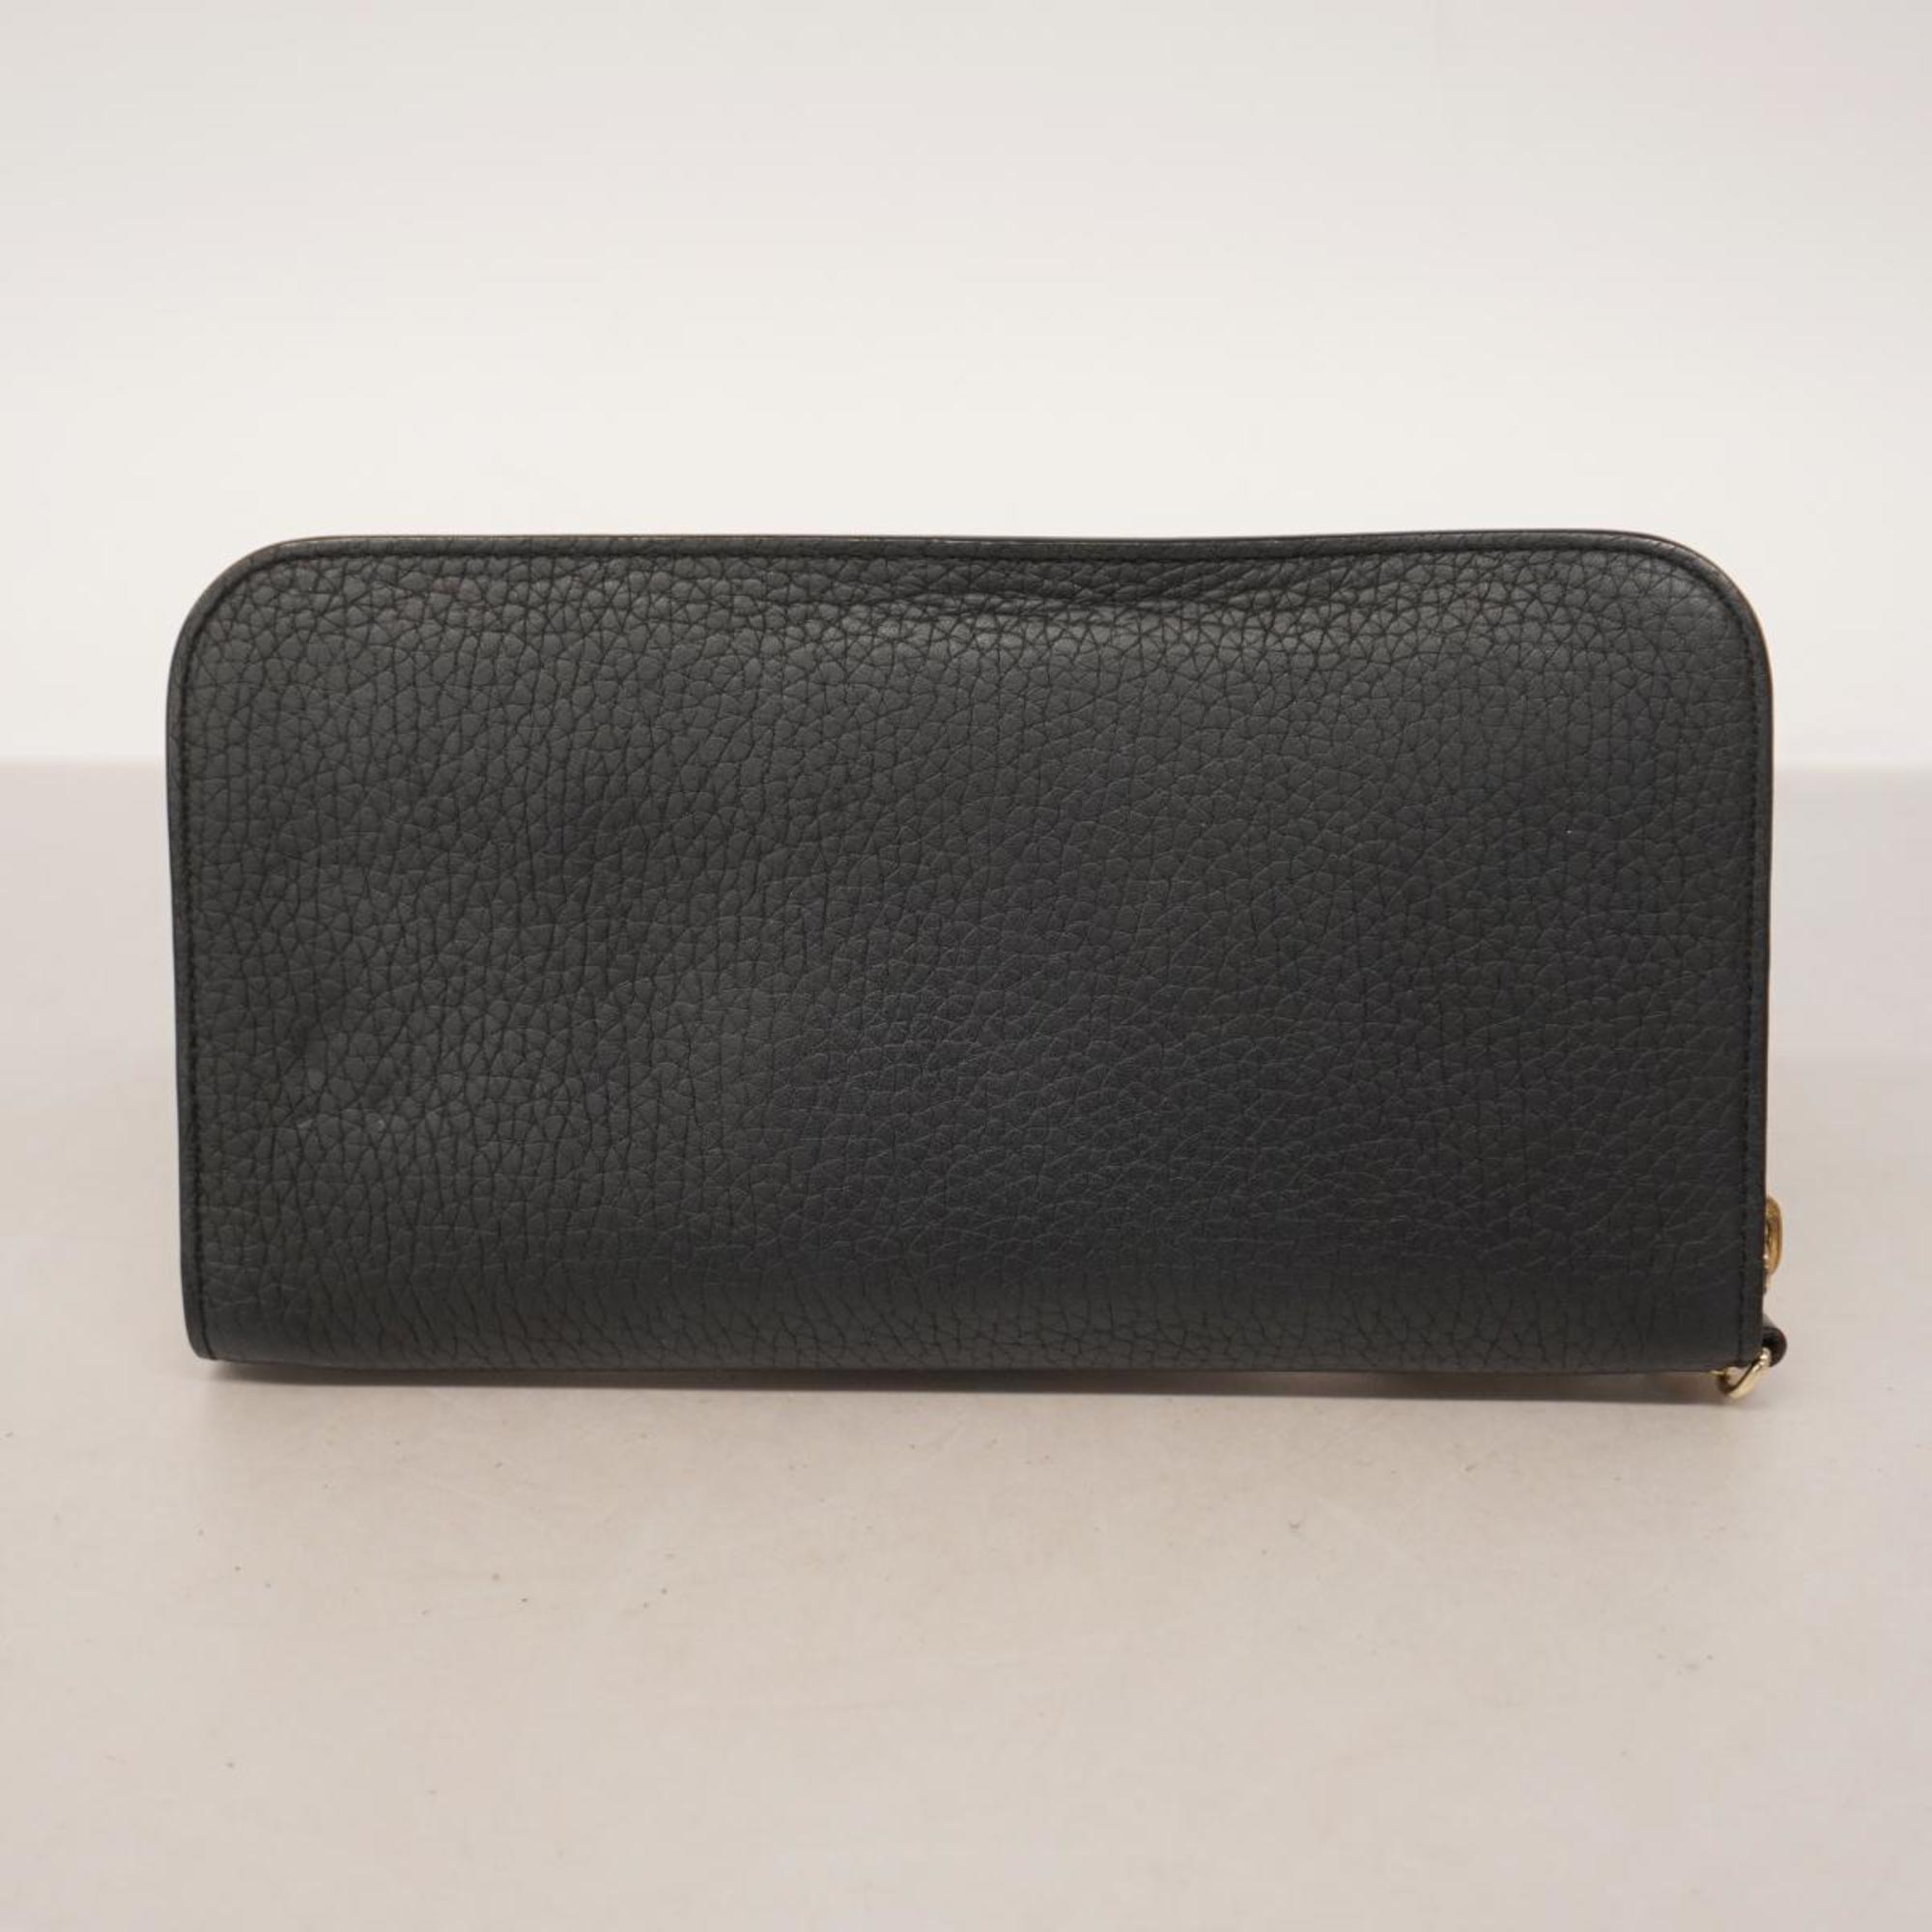 Christian Dior Long Wallet Leather Black Champagne Women's